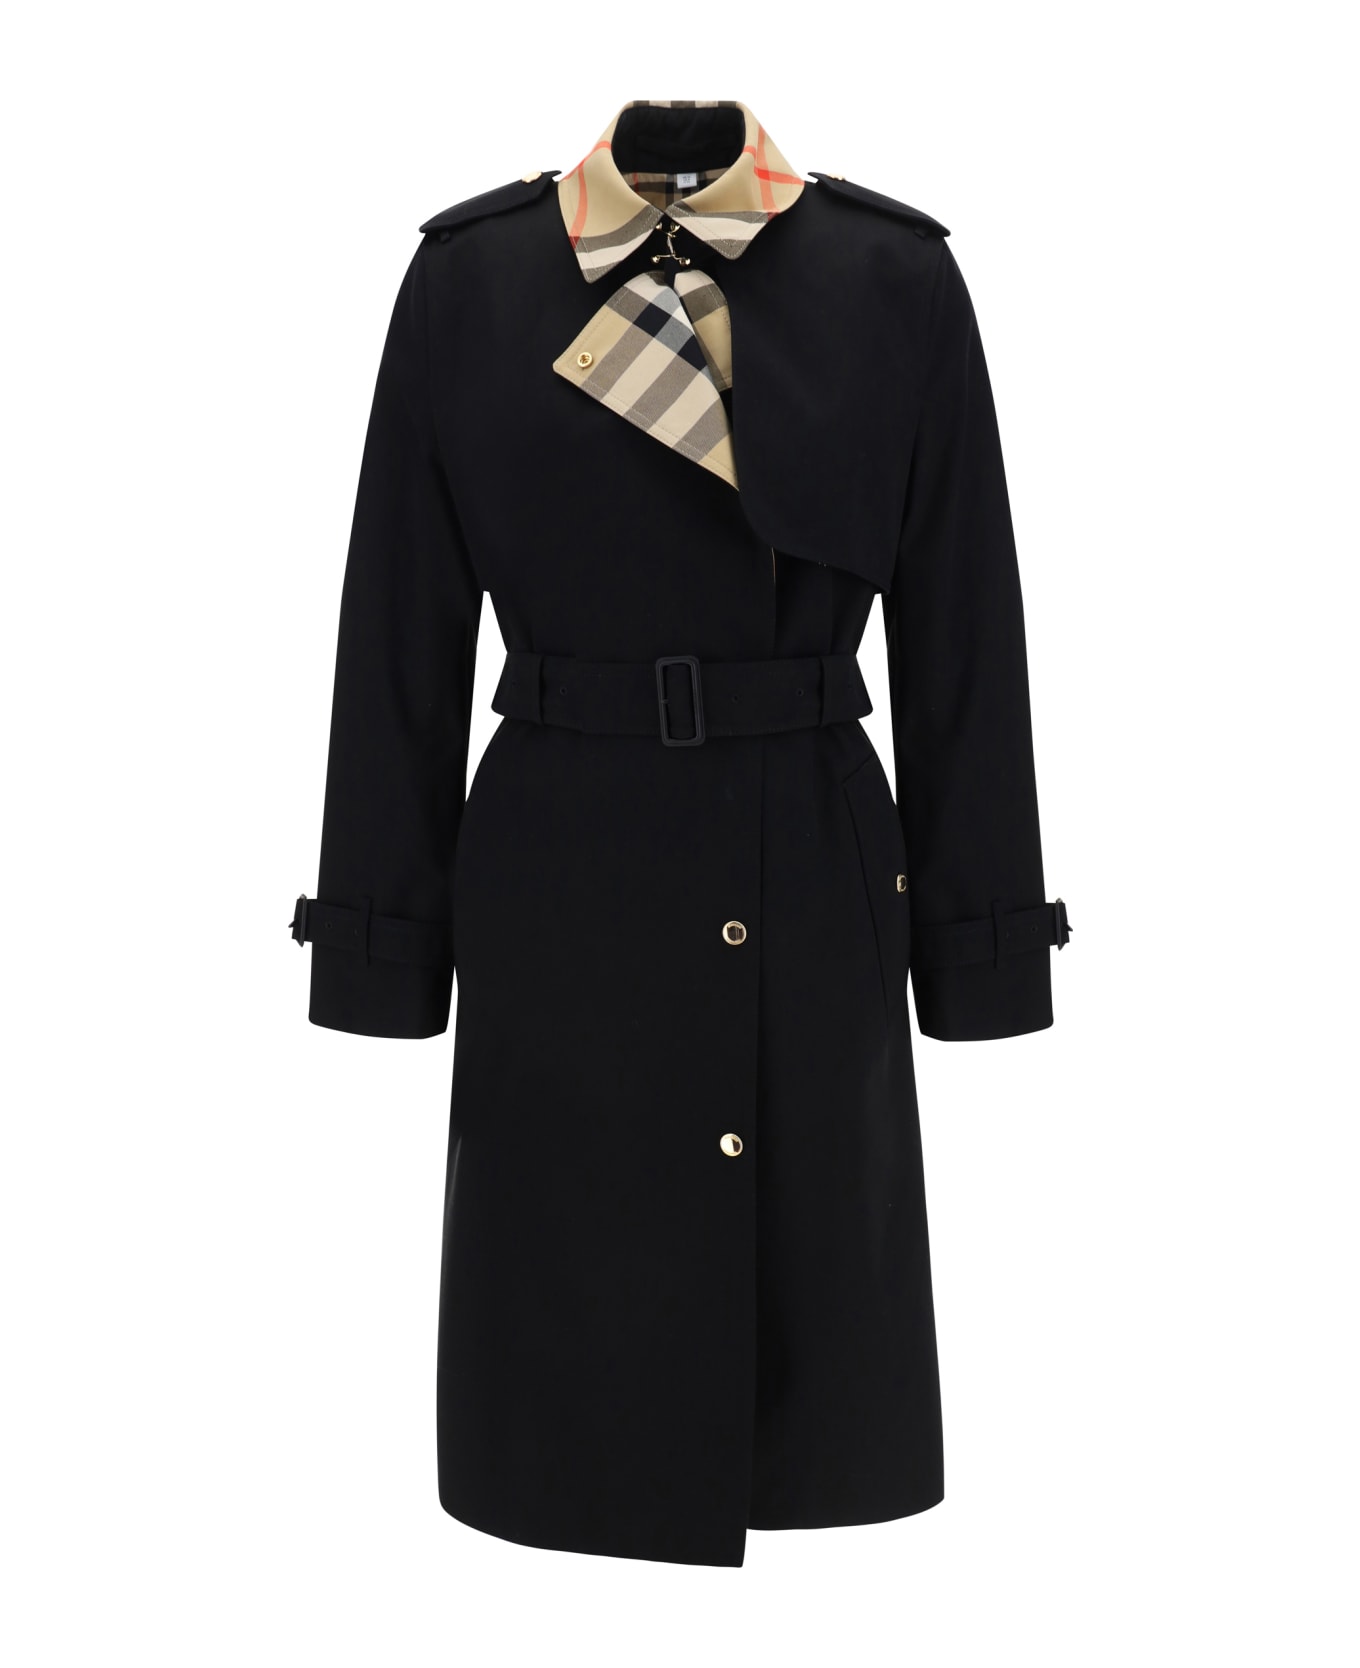 Burberry Belted Trench Coat - Black コート